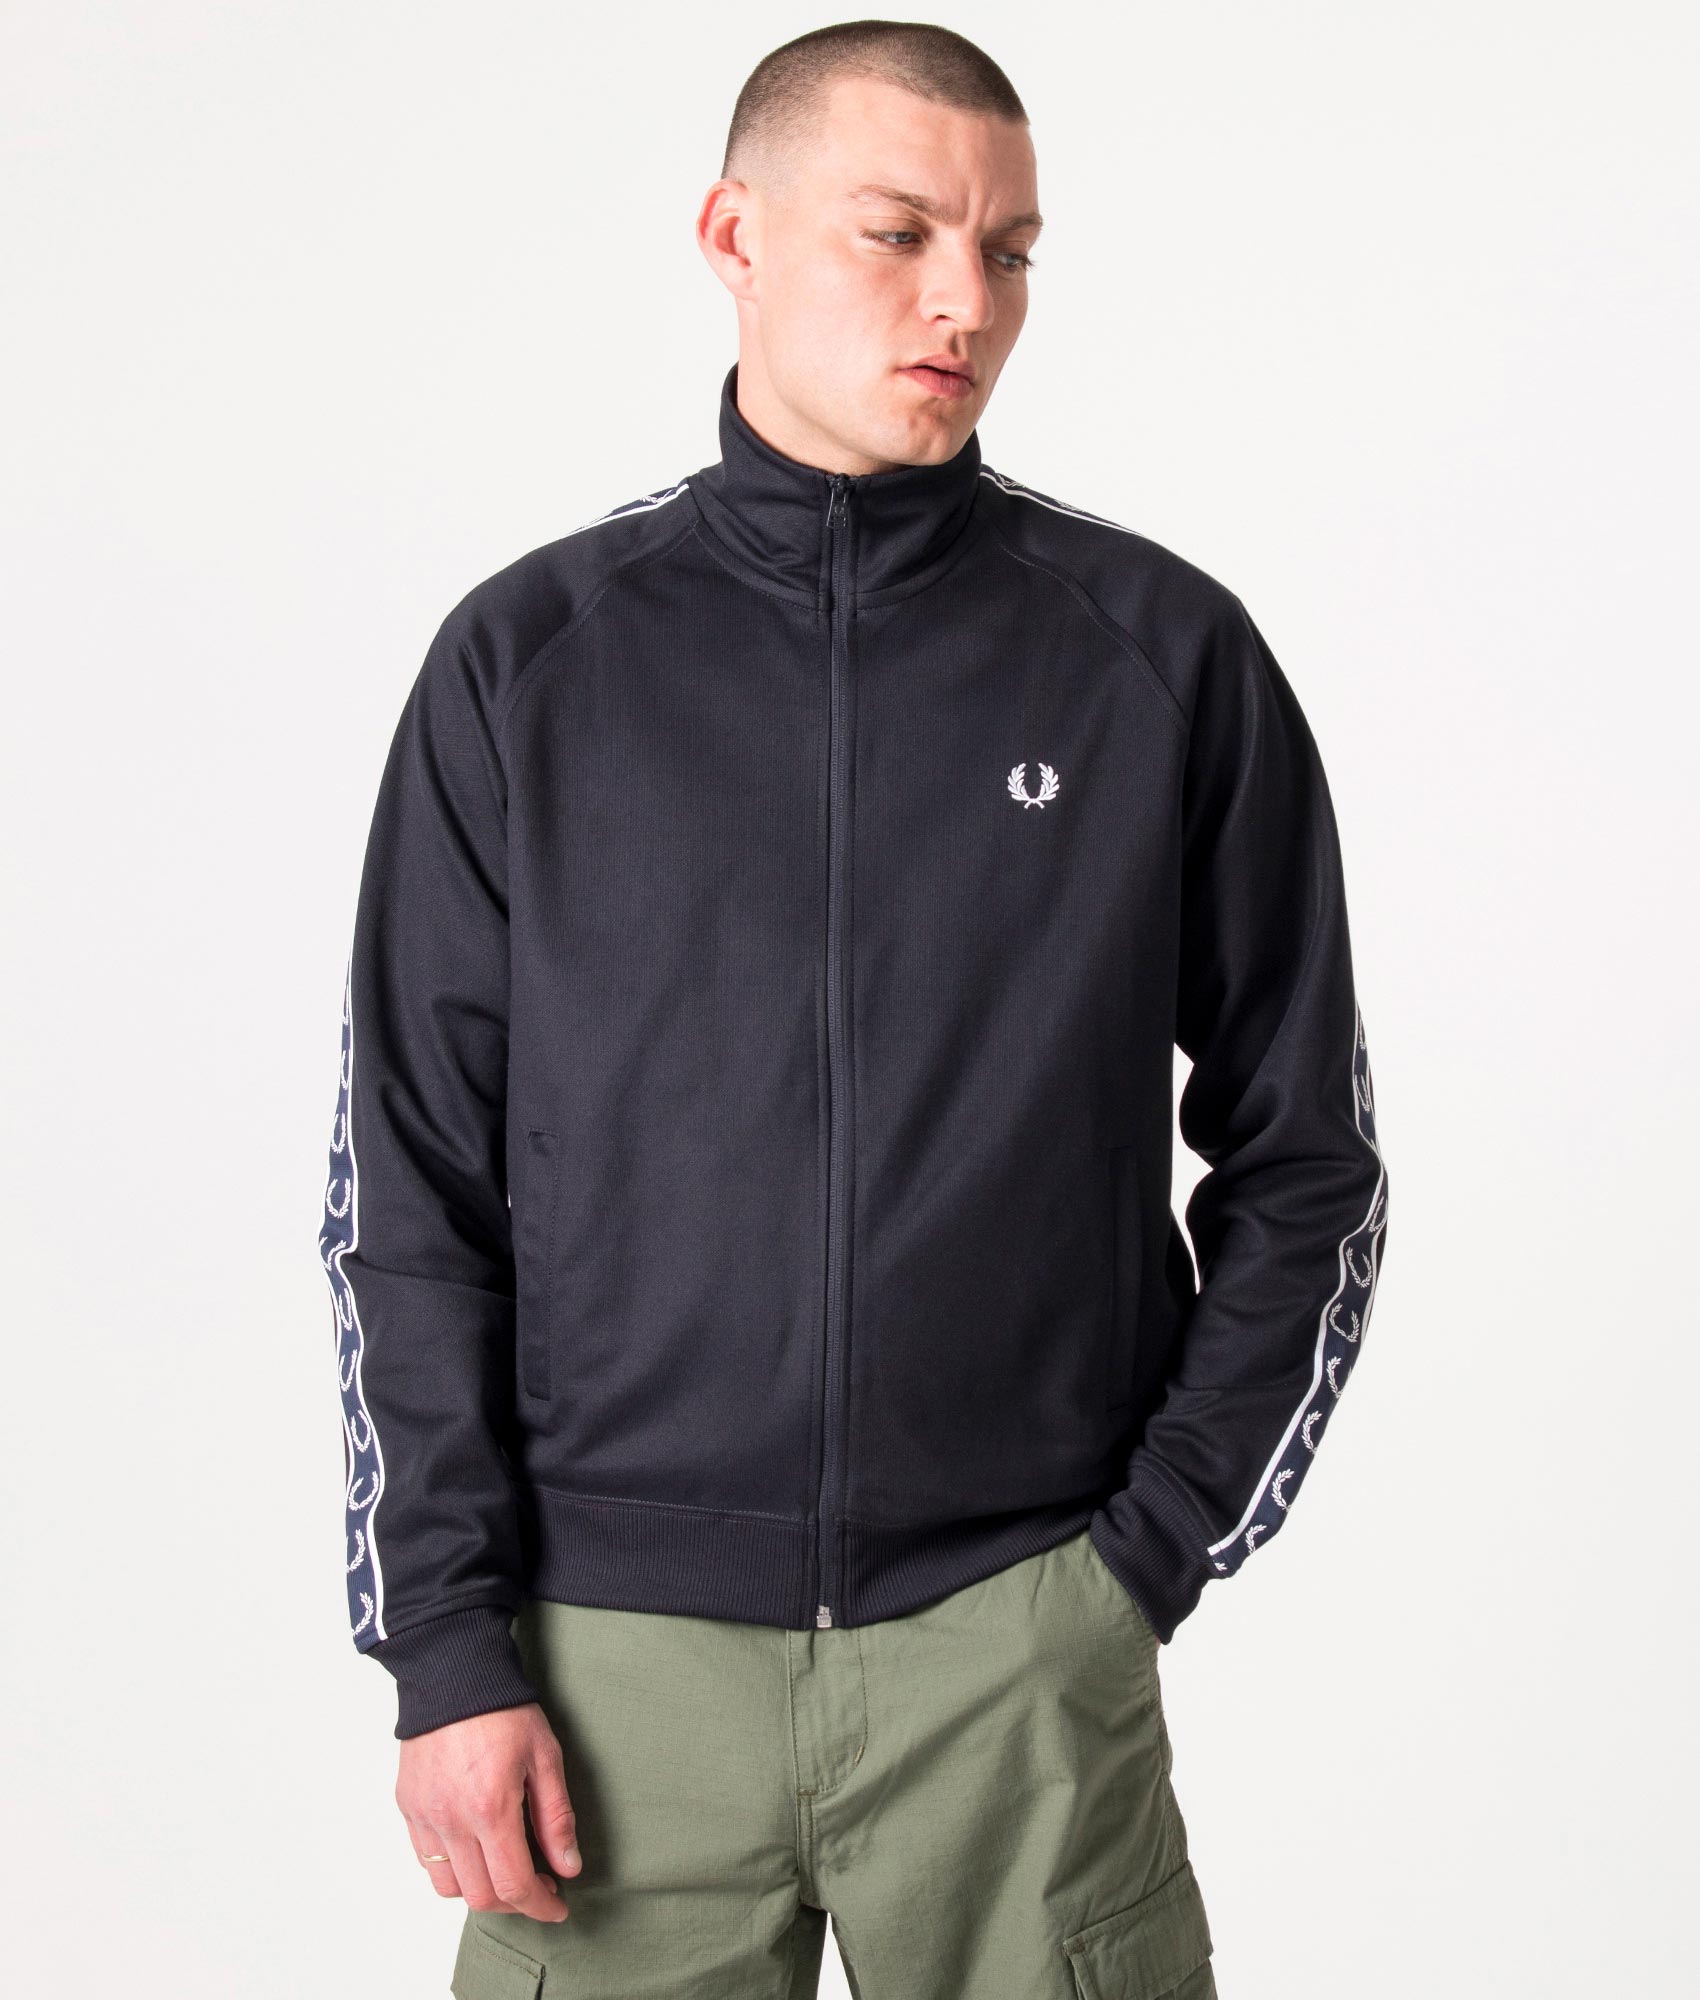 Fred Perry Sportswear Tracksuit Top Black with Logo Strip on Arms